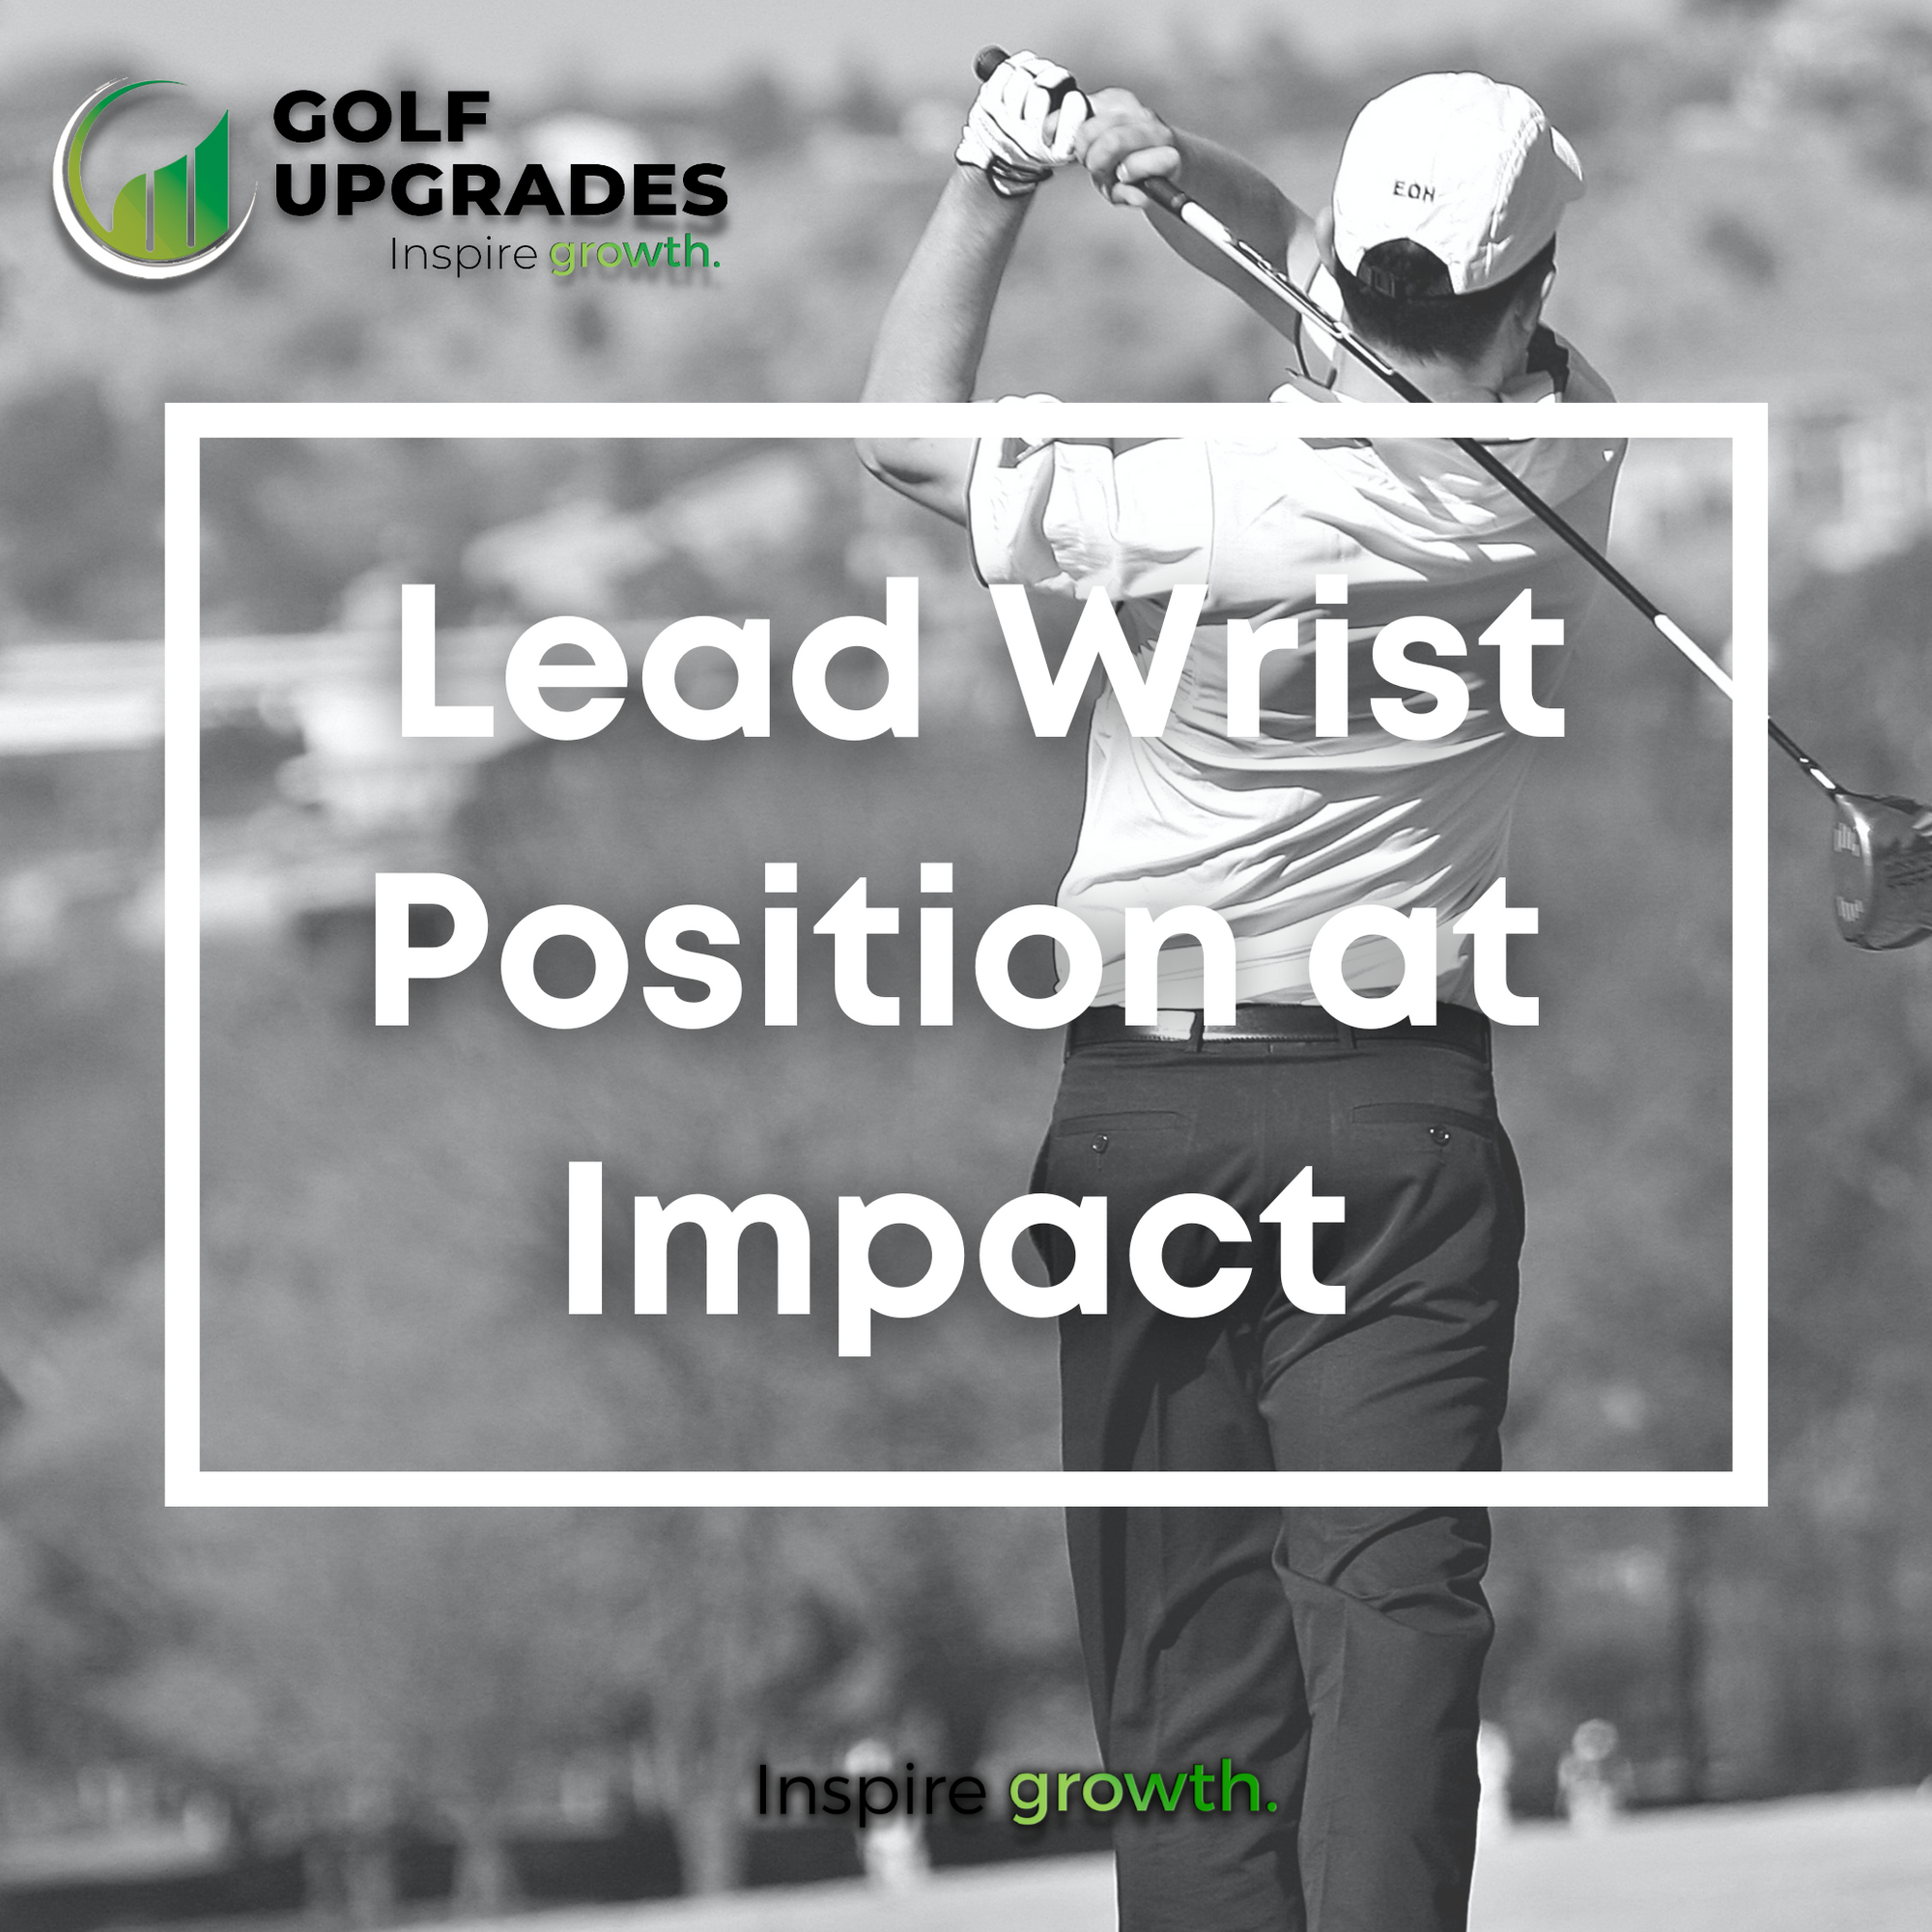 Improving Your Lead Wrist Position at Impact | Golf Upgrades